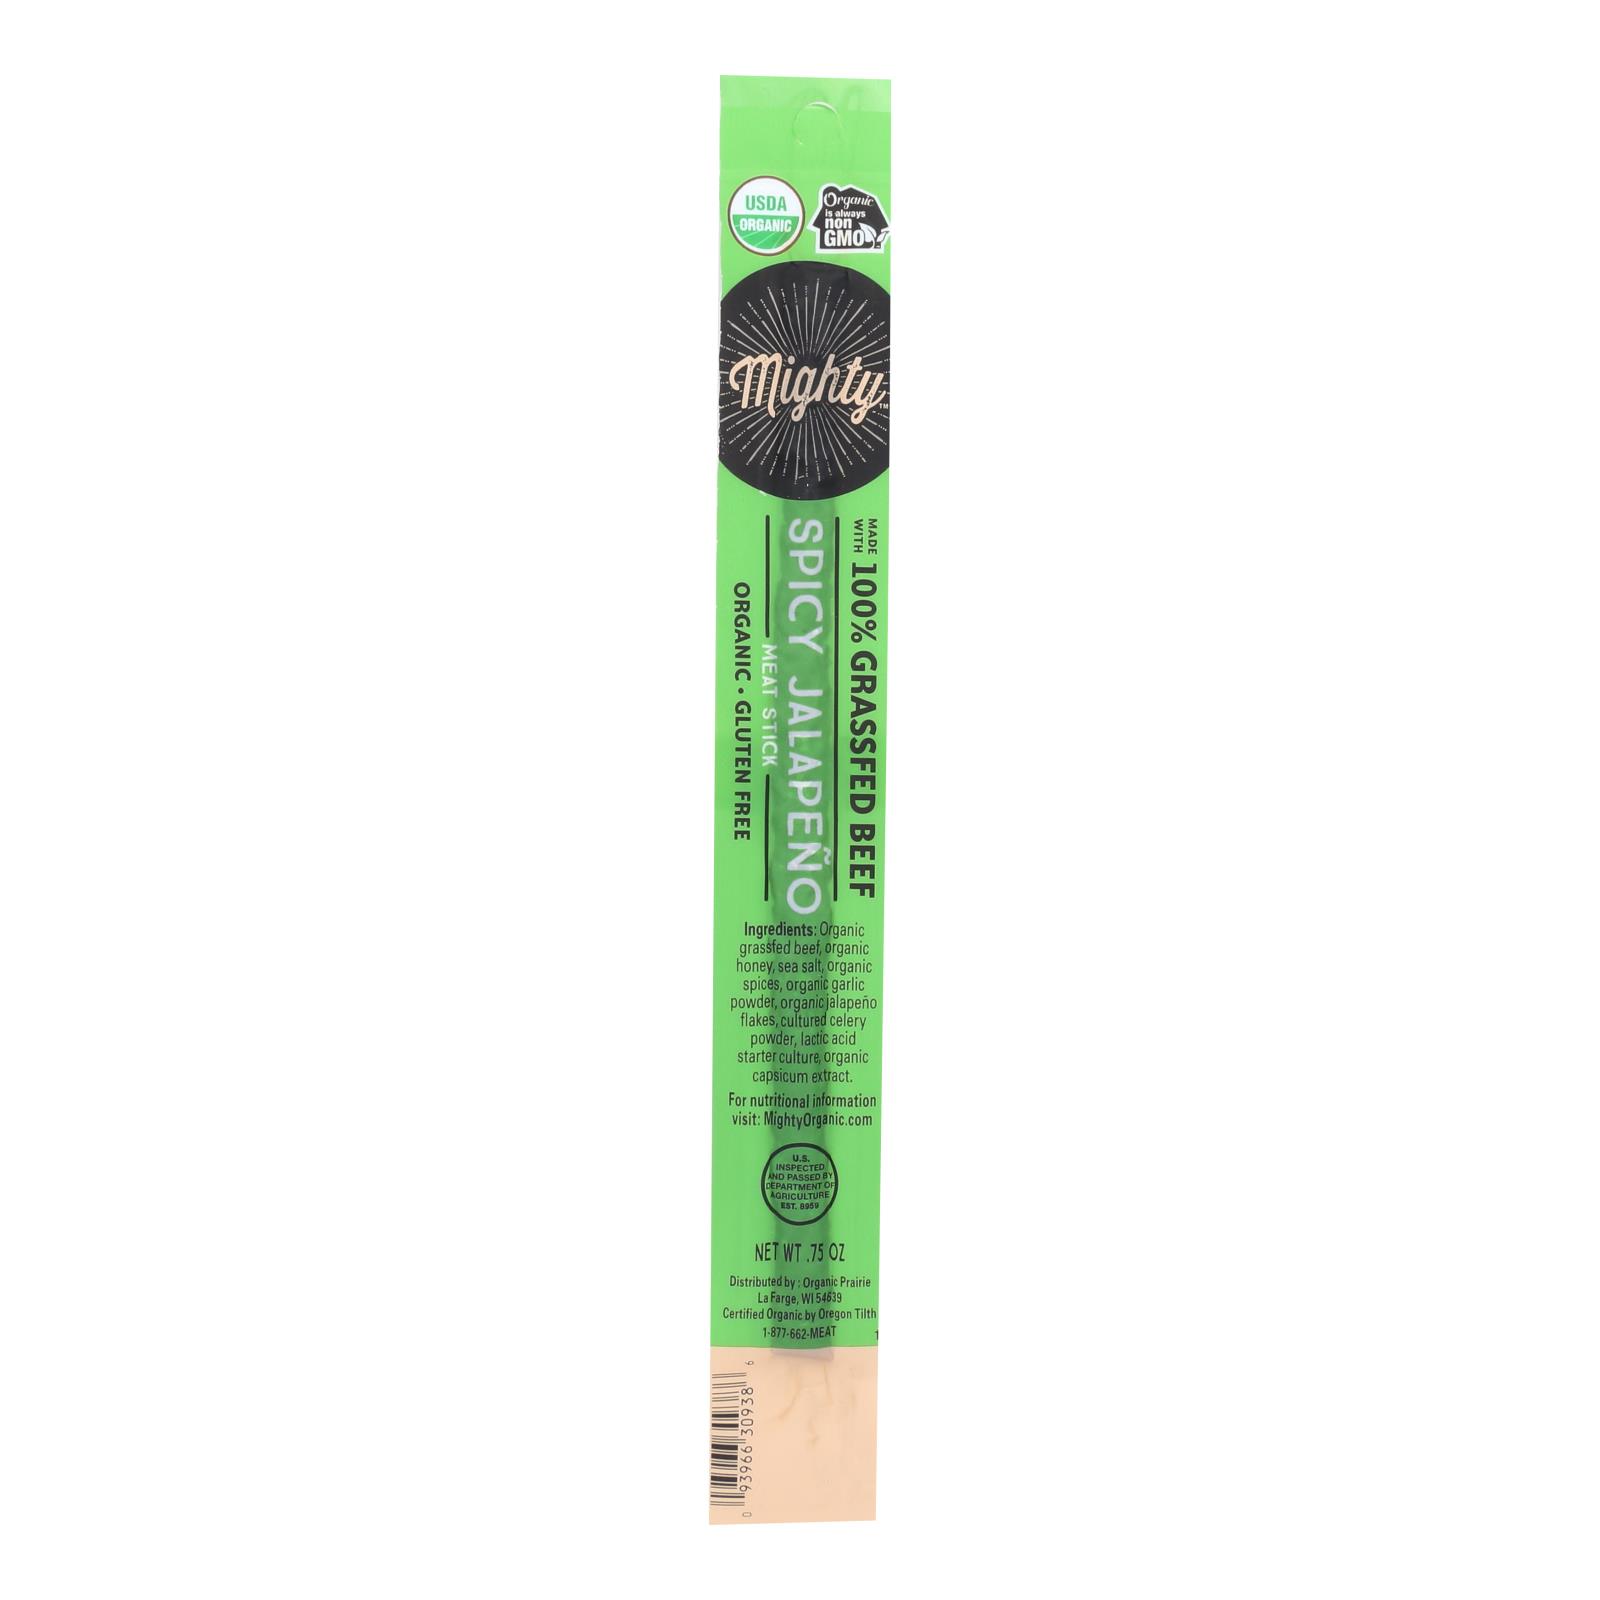 Mighty Organic Mighty Jalapeno Beef Stick - Case of 24 - .75 OZ